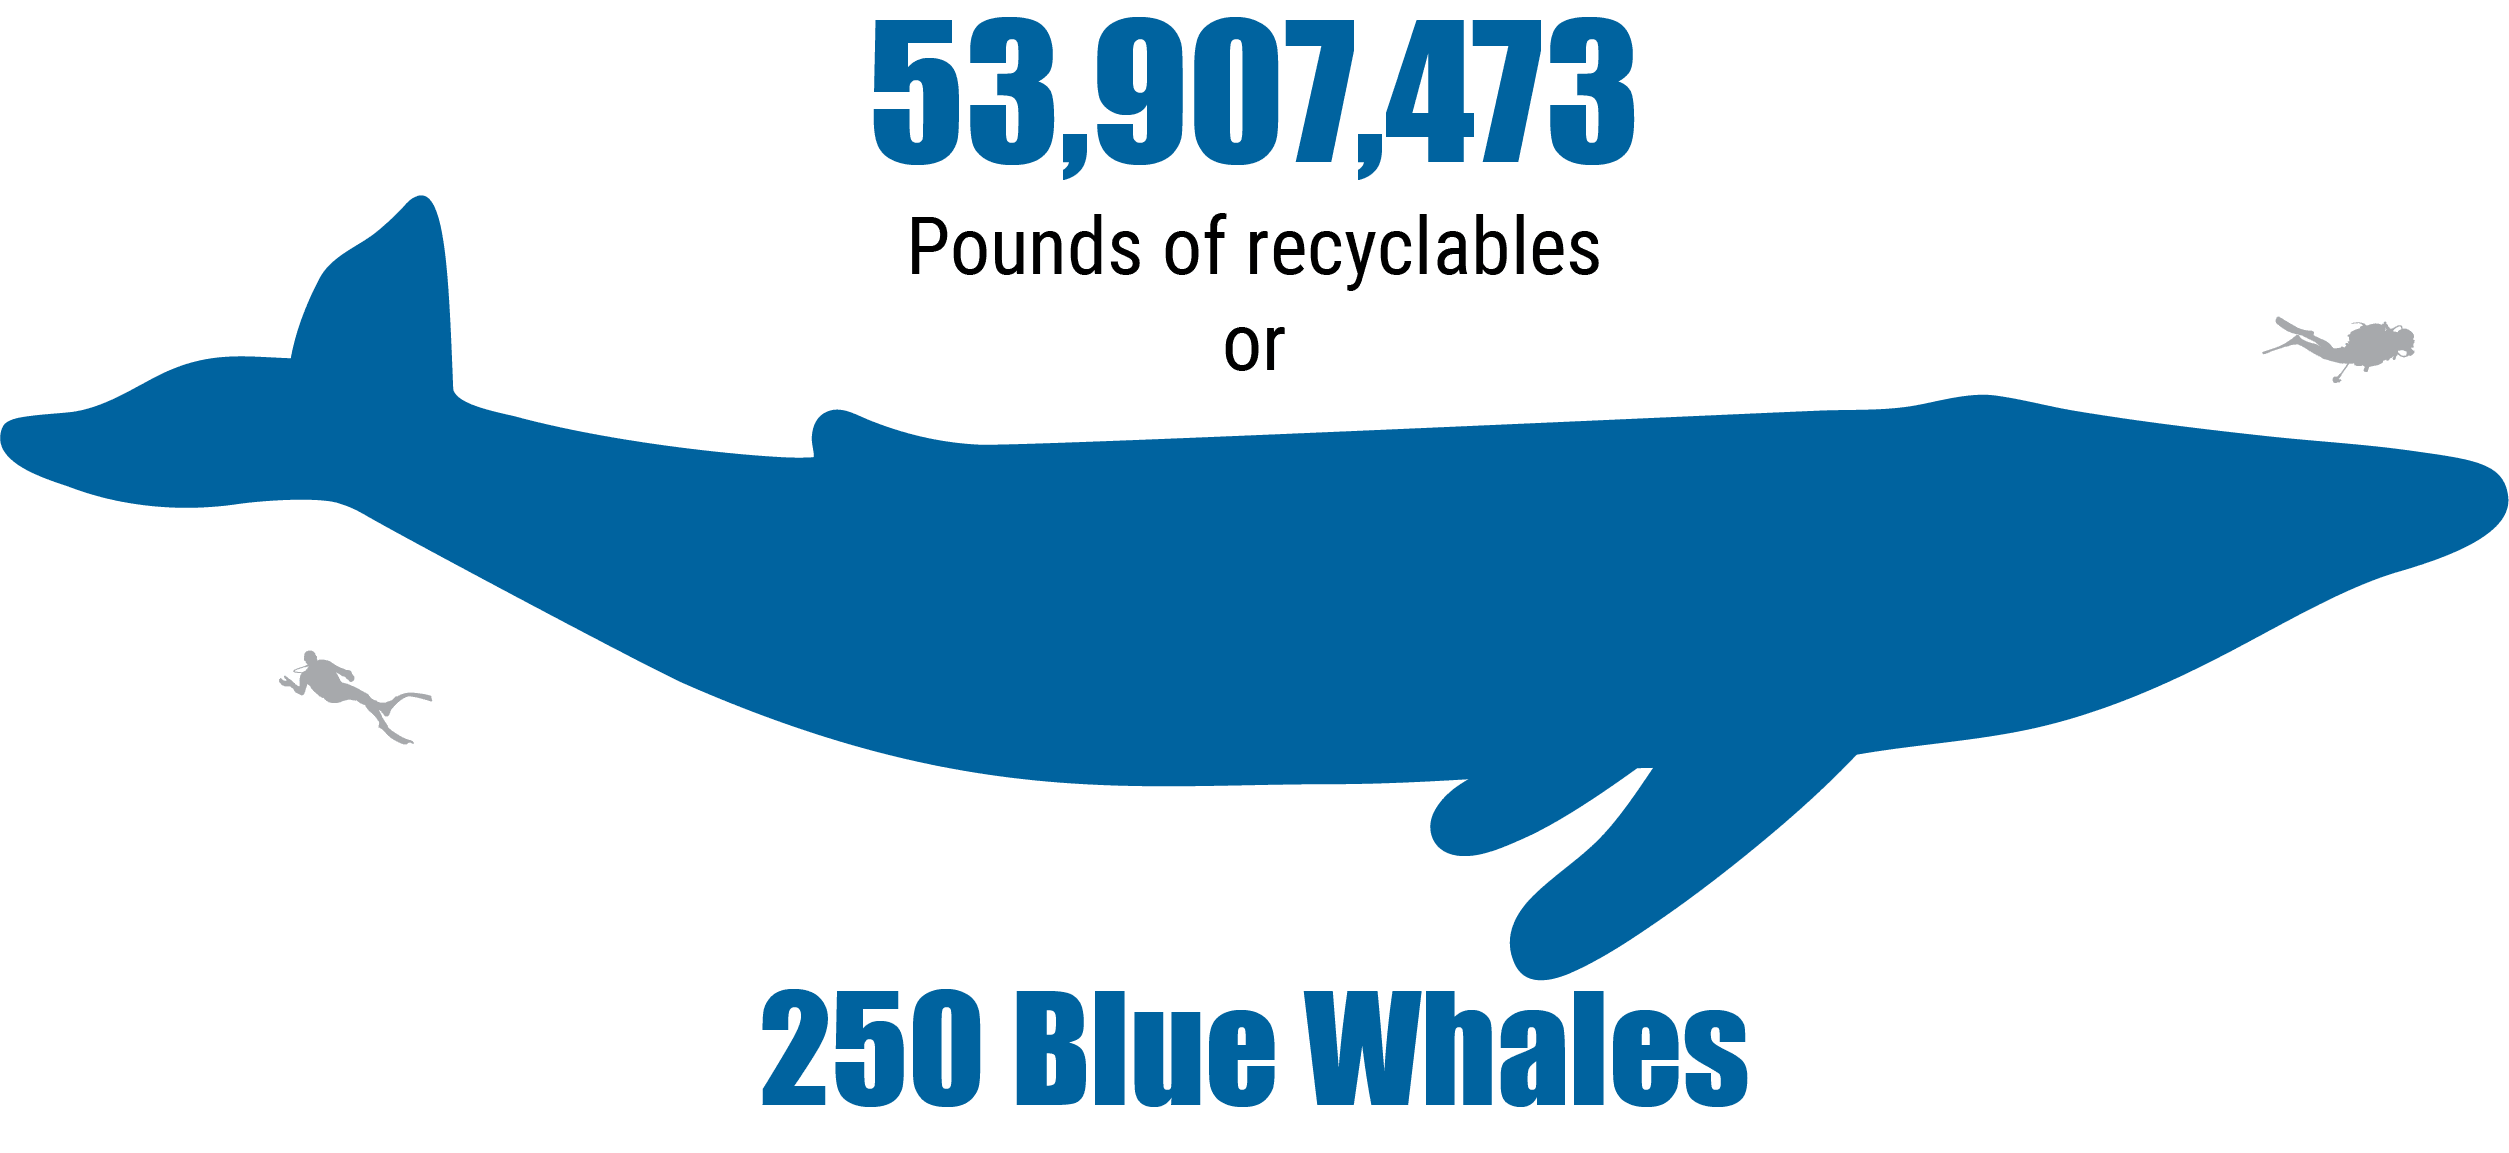 2021 Recycling Total Weights